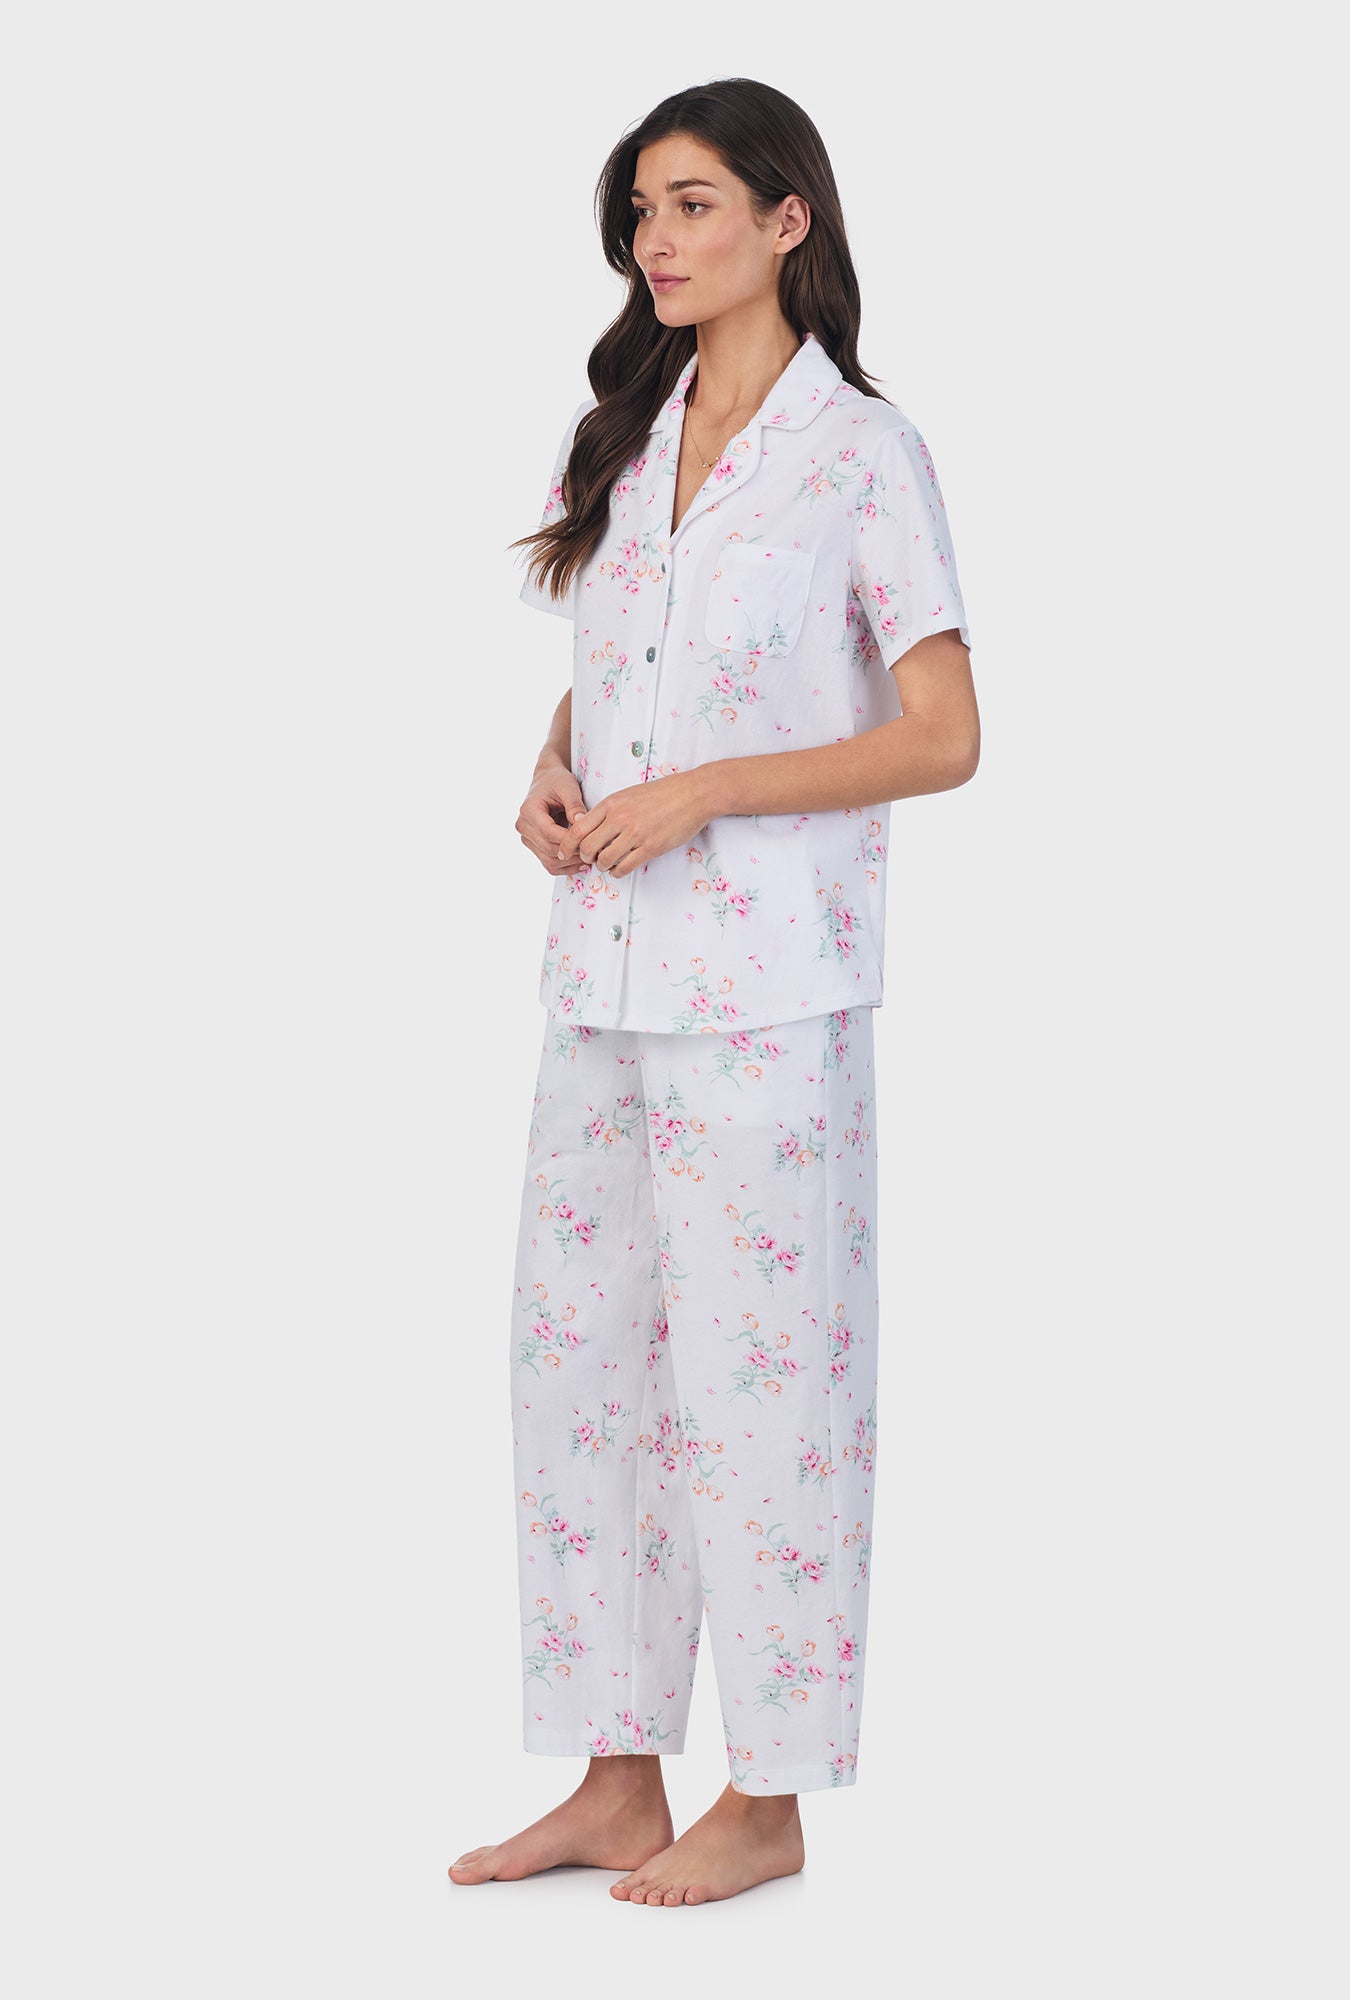 A lady wearing pink short sleeve cotton capri pajama set with floral bouquet print.